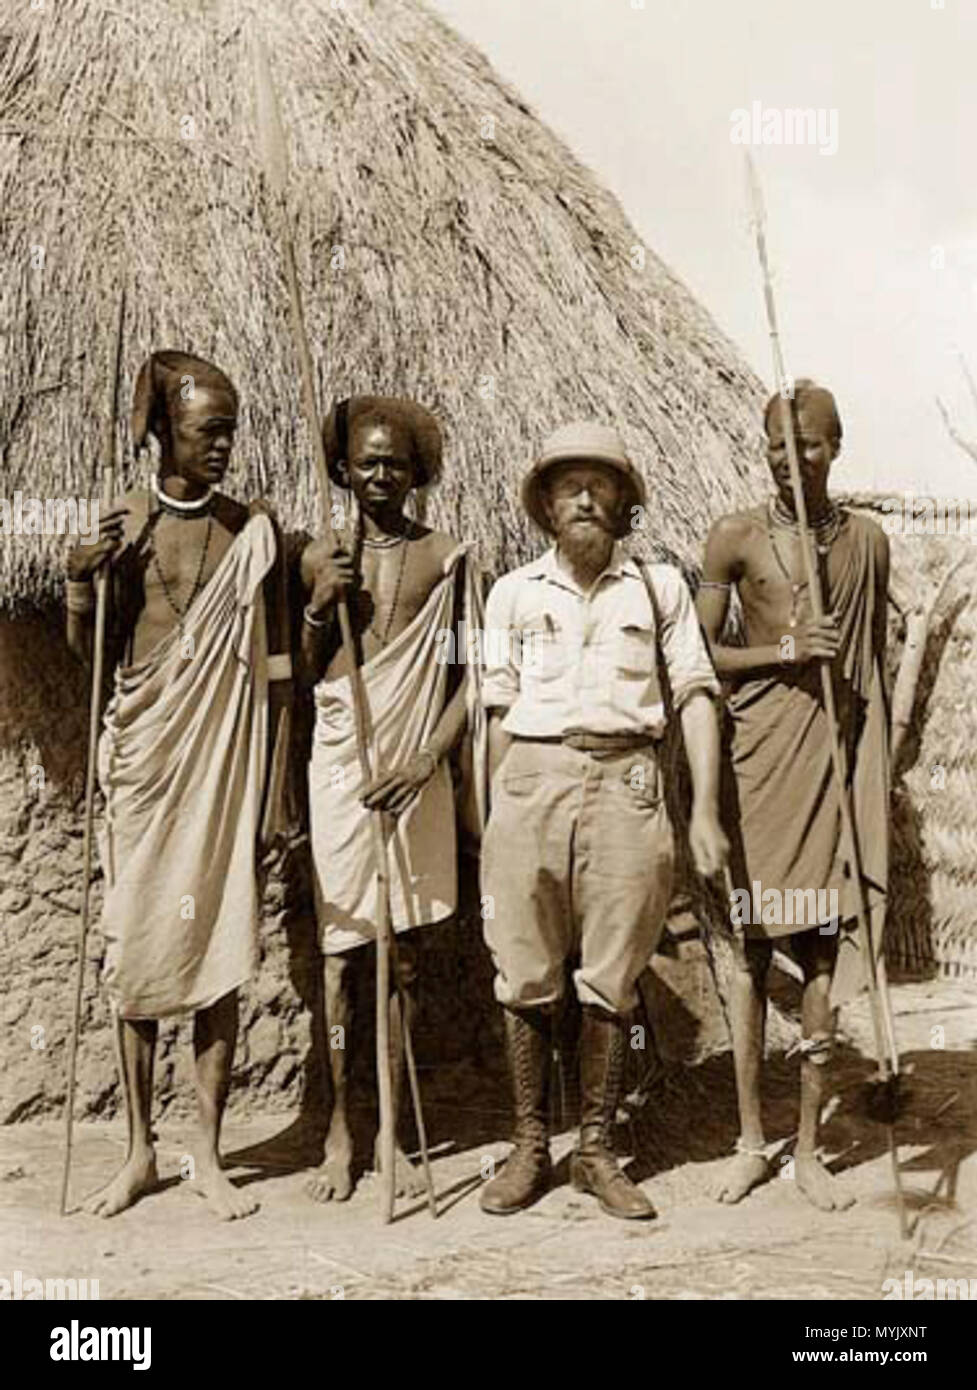 . Kazimierz Nowak among African wariors. The photo probably taken by Kazimierz Nowak (1897-1937, the author is on the photo; taken probably by a self-timer) during his trip through Africa - a Polish traveller, correspondent and photographer. Probably the first man in the world who crossed Africa alone from the North to the South and from the South to the North (from 1931 to 1936; on foot, by bicycle and canoe). circa about 1931-36. probably Kazimierz Nowak or an unknown author 37 Among African wariors Stock Photo